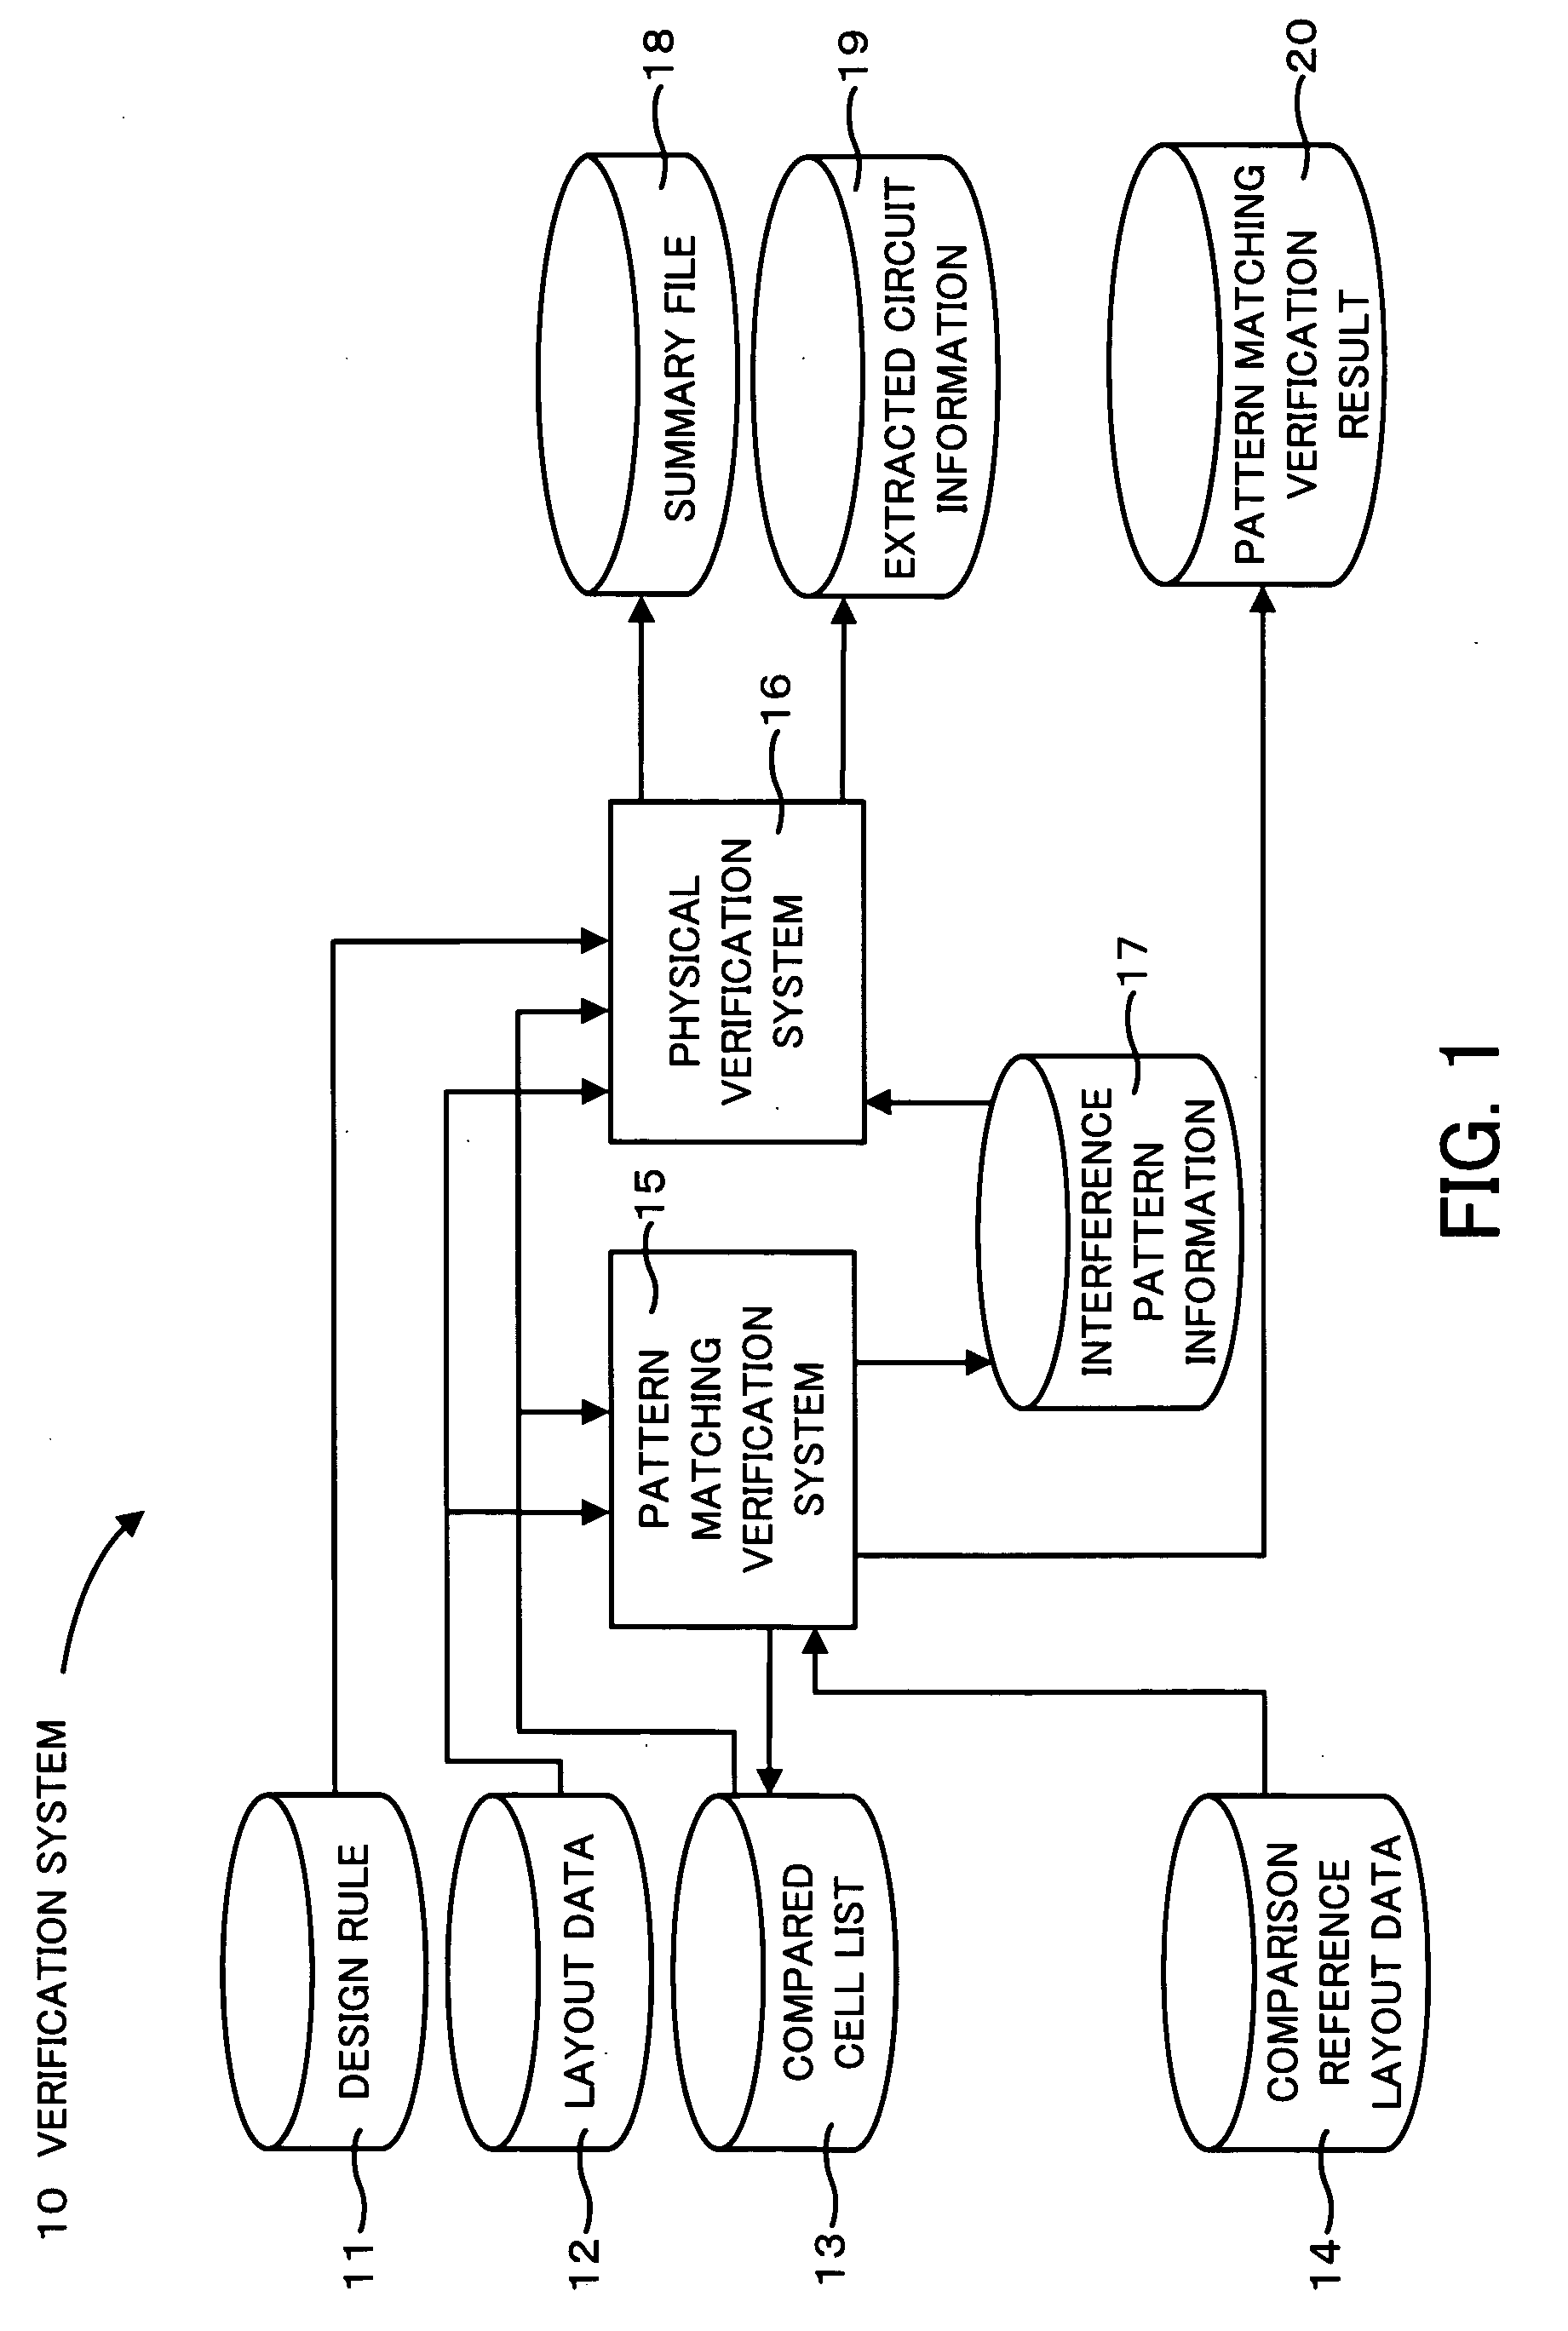 Semiconductor device verification system and semiconductor device fabrication method